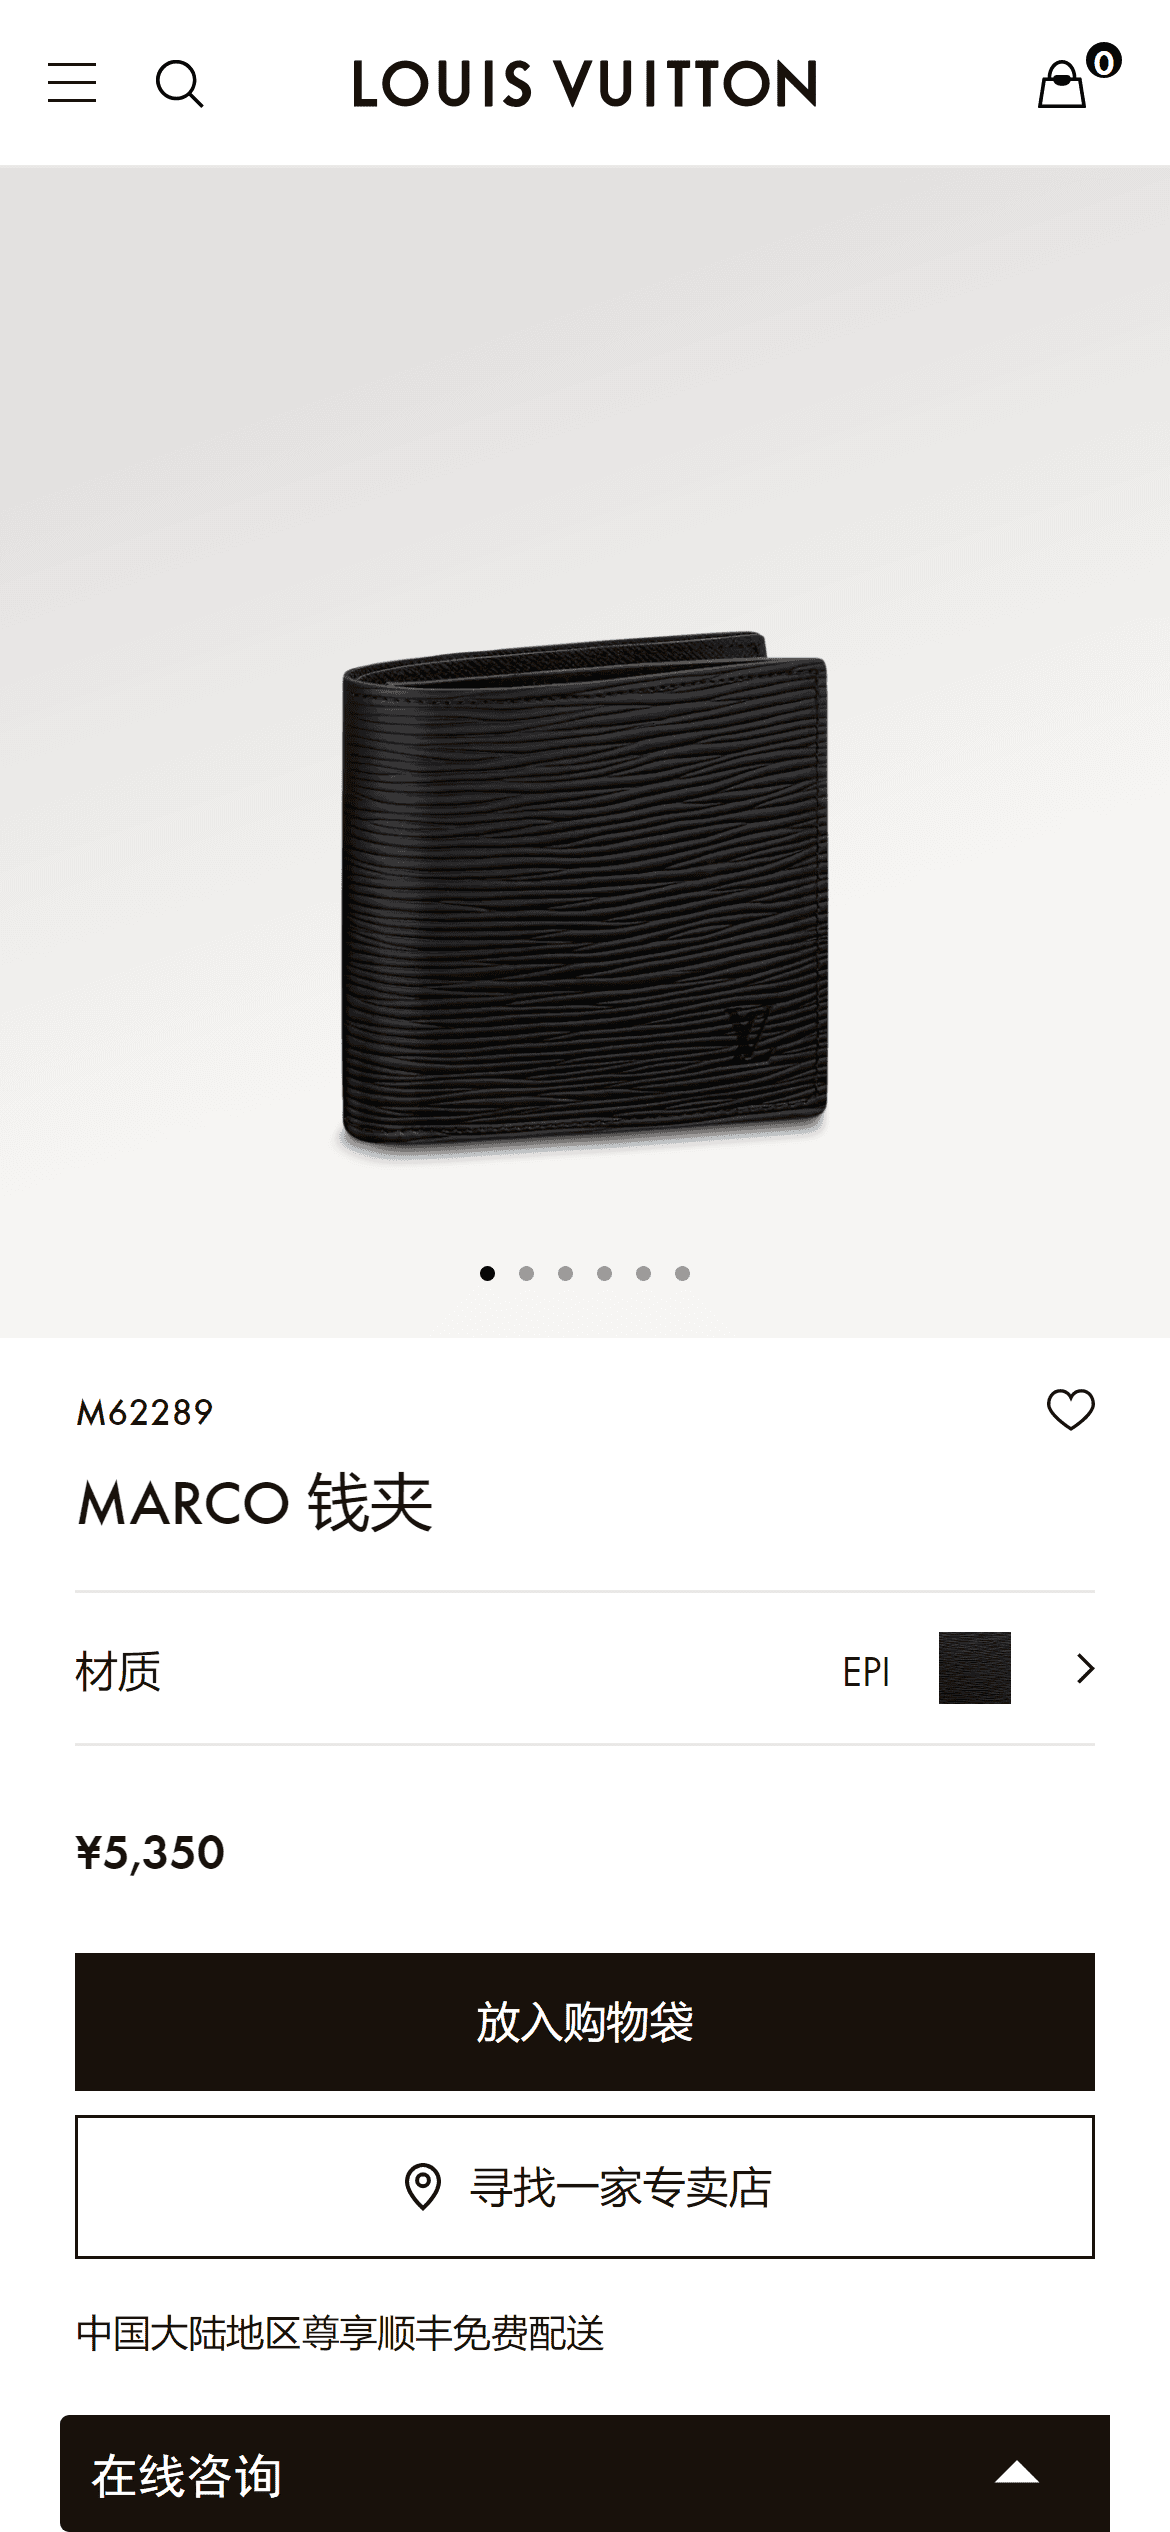 www.louisvuitton.cn_zhs-cn_products_marco-wallet-epi-nvprod200170v_M62289iPhone-12-Pro.png